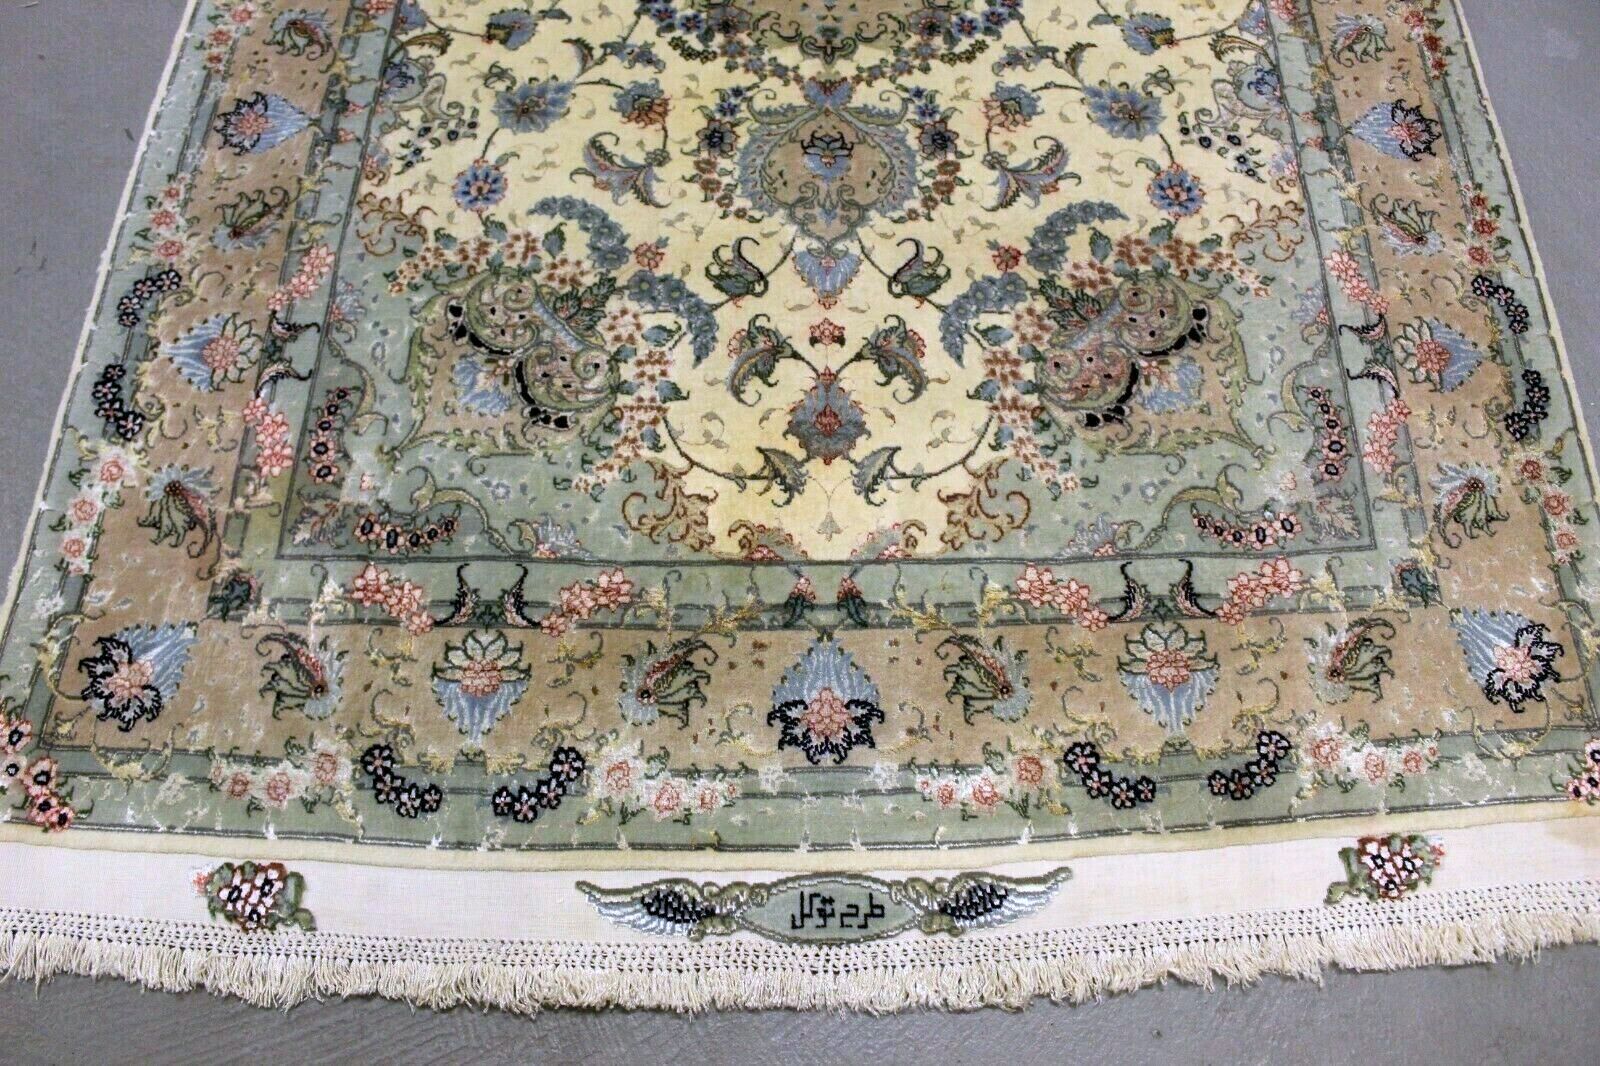 Rich and Diverse Color Palette Including Muted Greens, Creams, Blues, and Touches of Reds on Vintage Tabriz Rug - 1970s